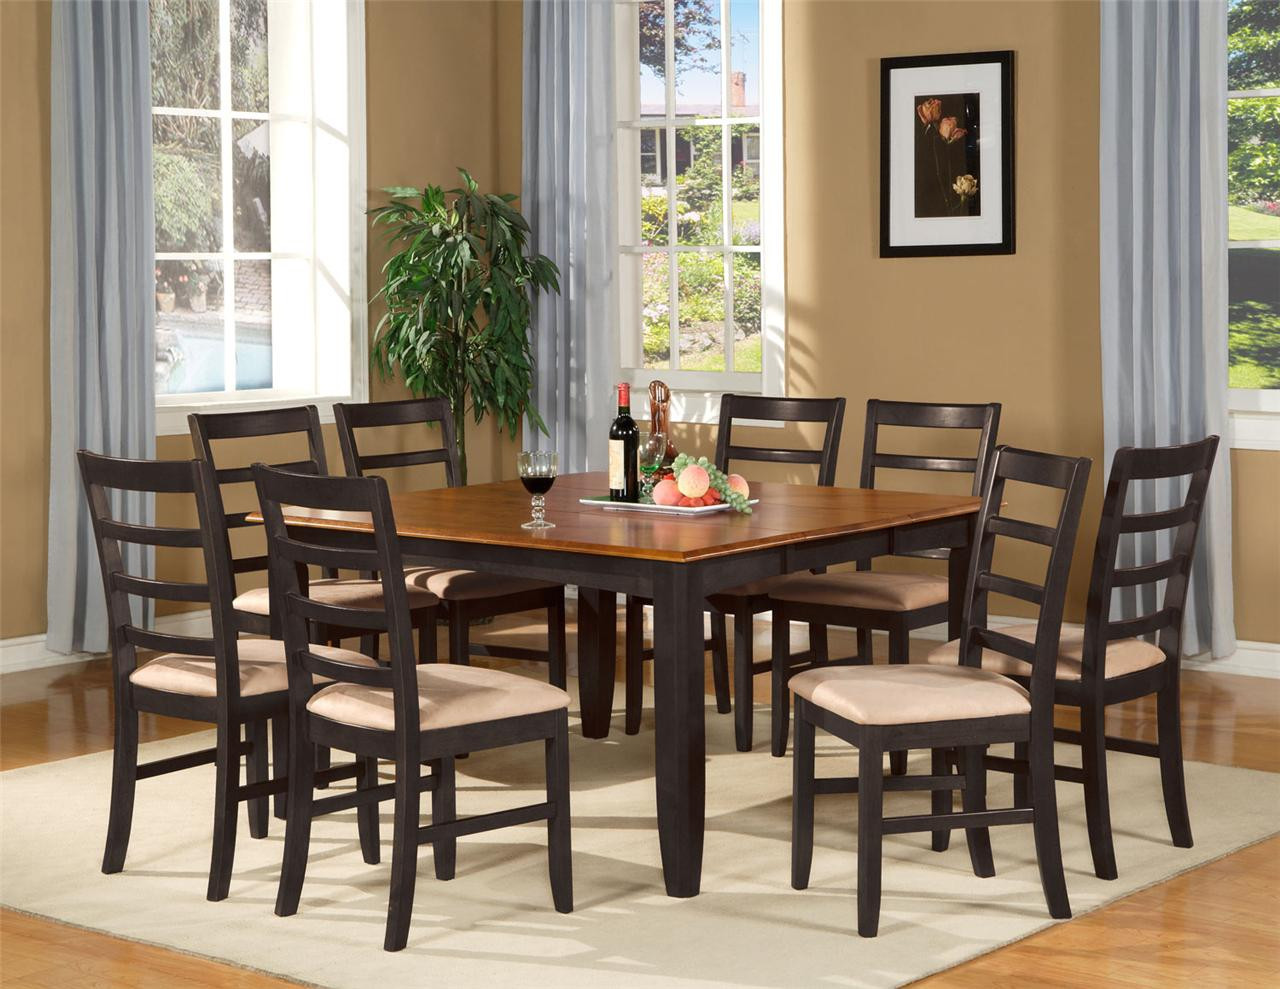 Best 20 Dining Room Table and Chairs - Best Collections Ever | Home